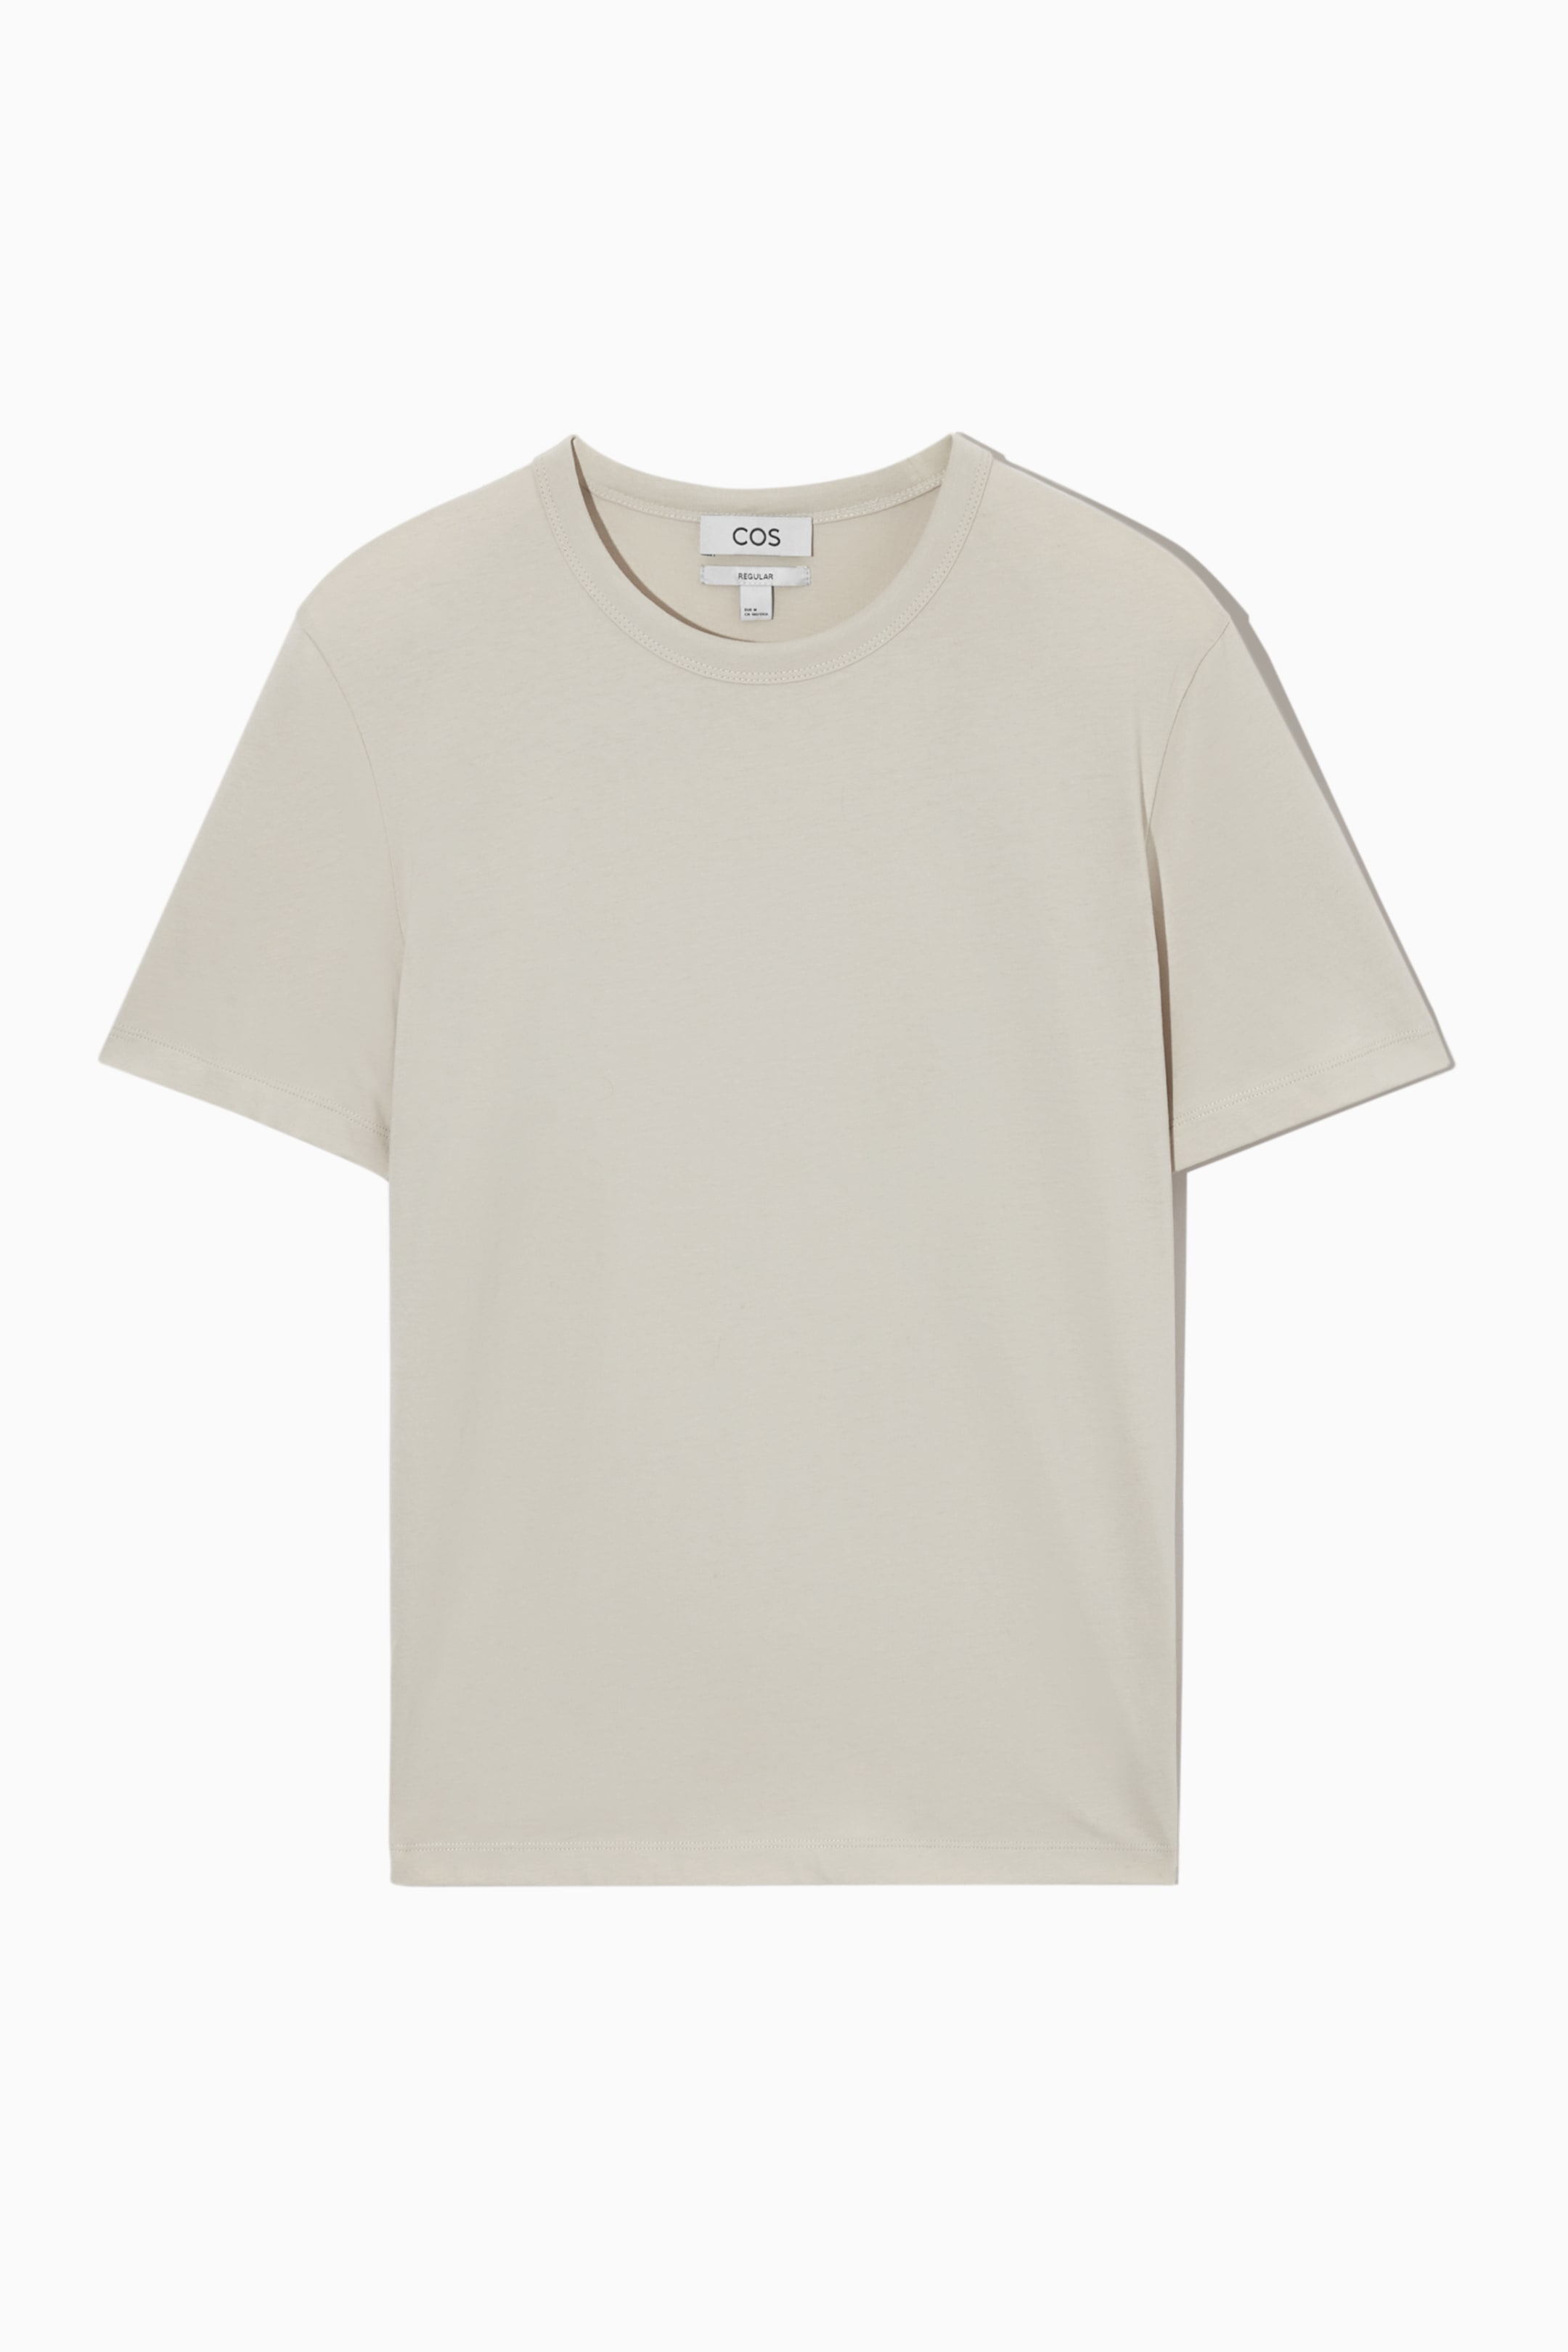 Front image of cos REGULAR-FIT MID-WEIGHT BRUSHED T-SHIRT in LIGHT BEIGE